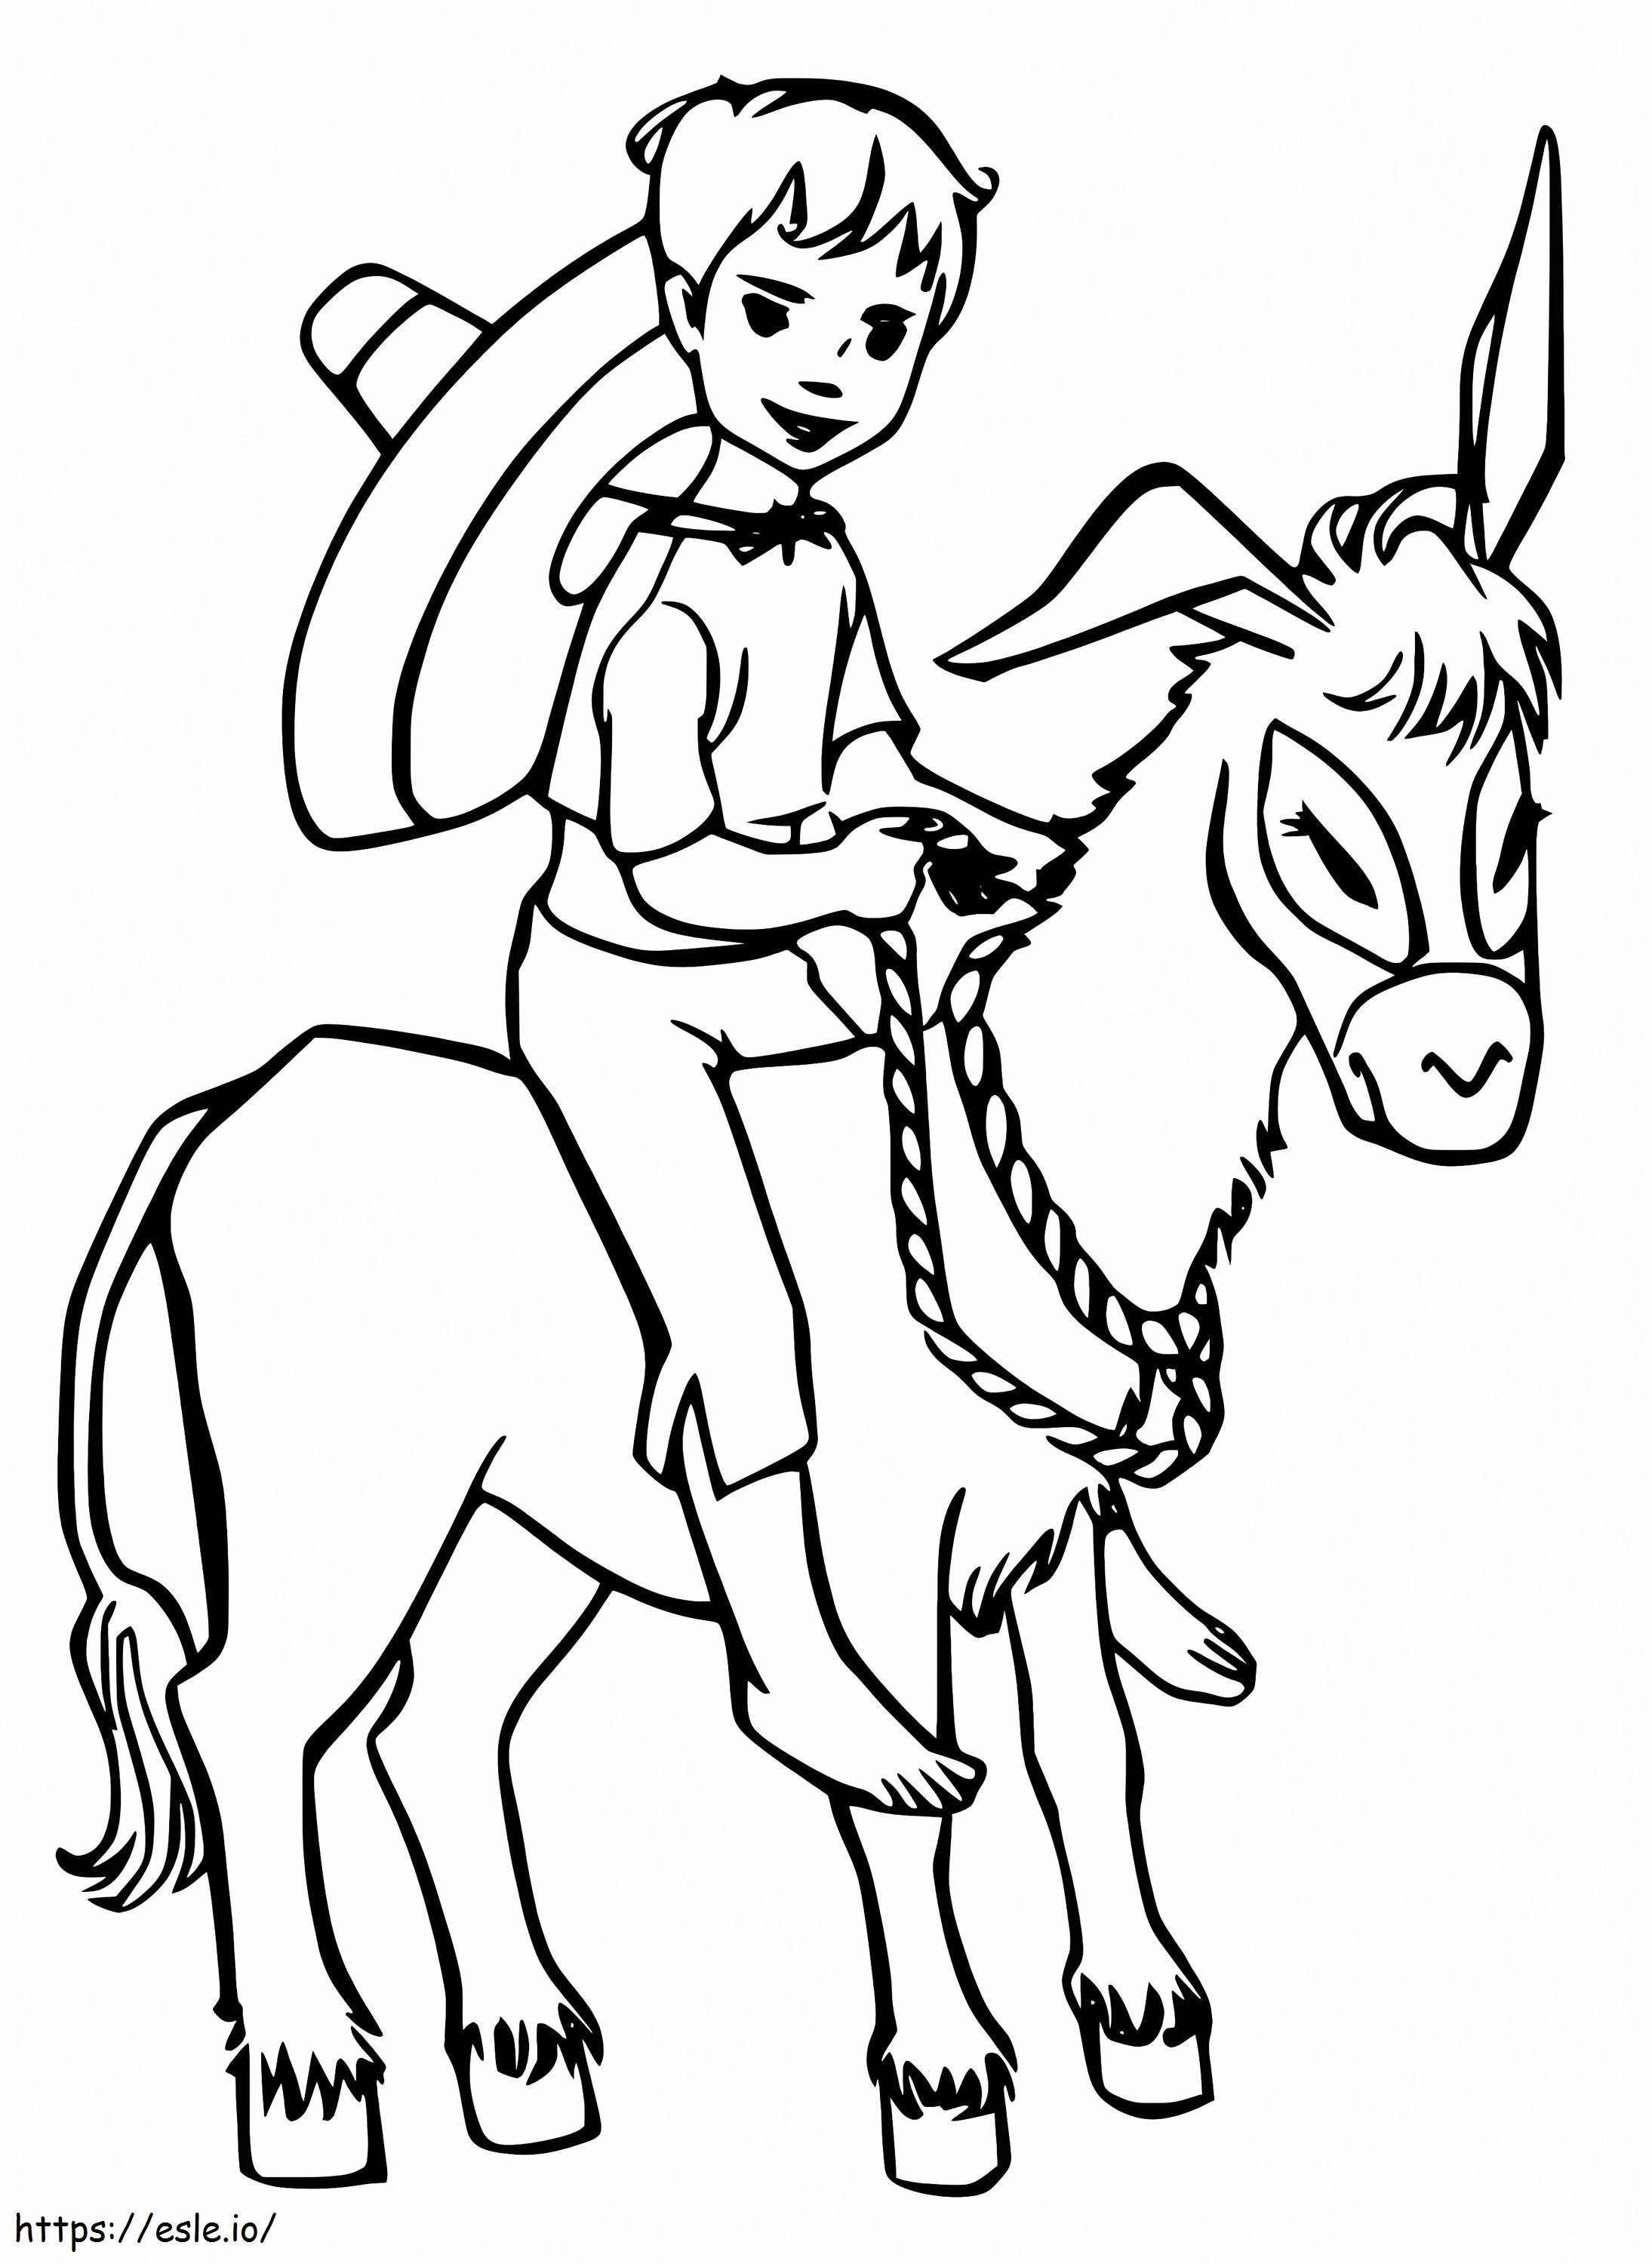 Little Girl Riding Mule coloring page